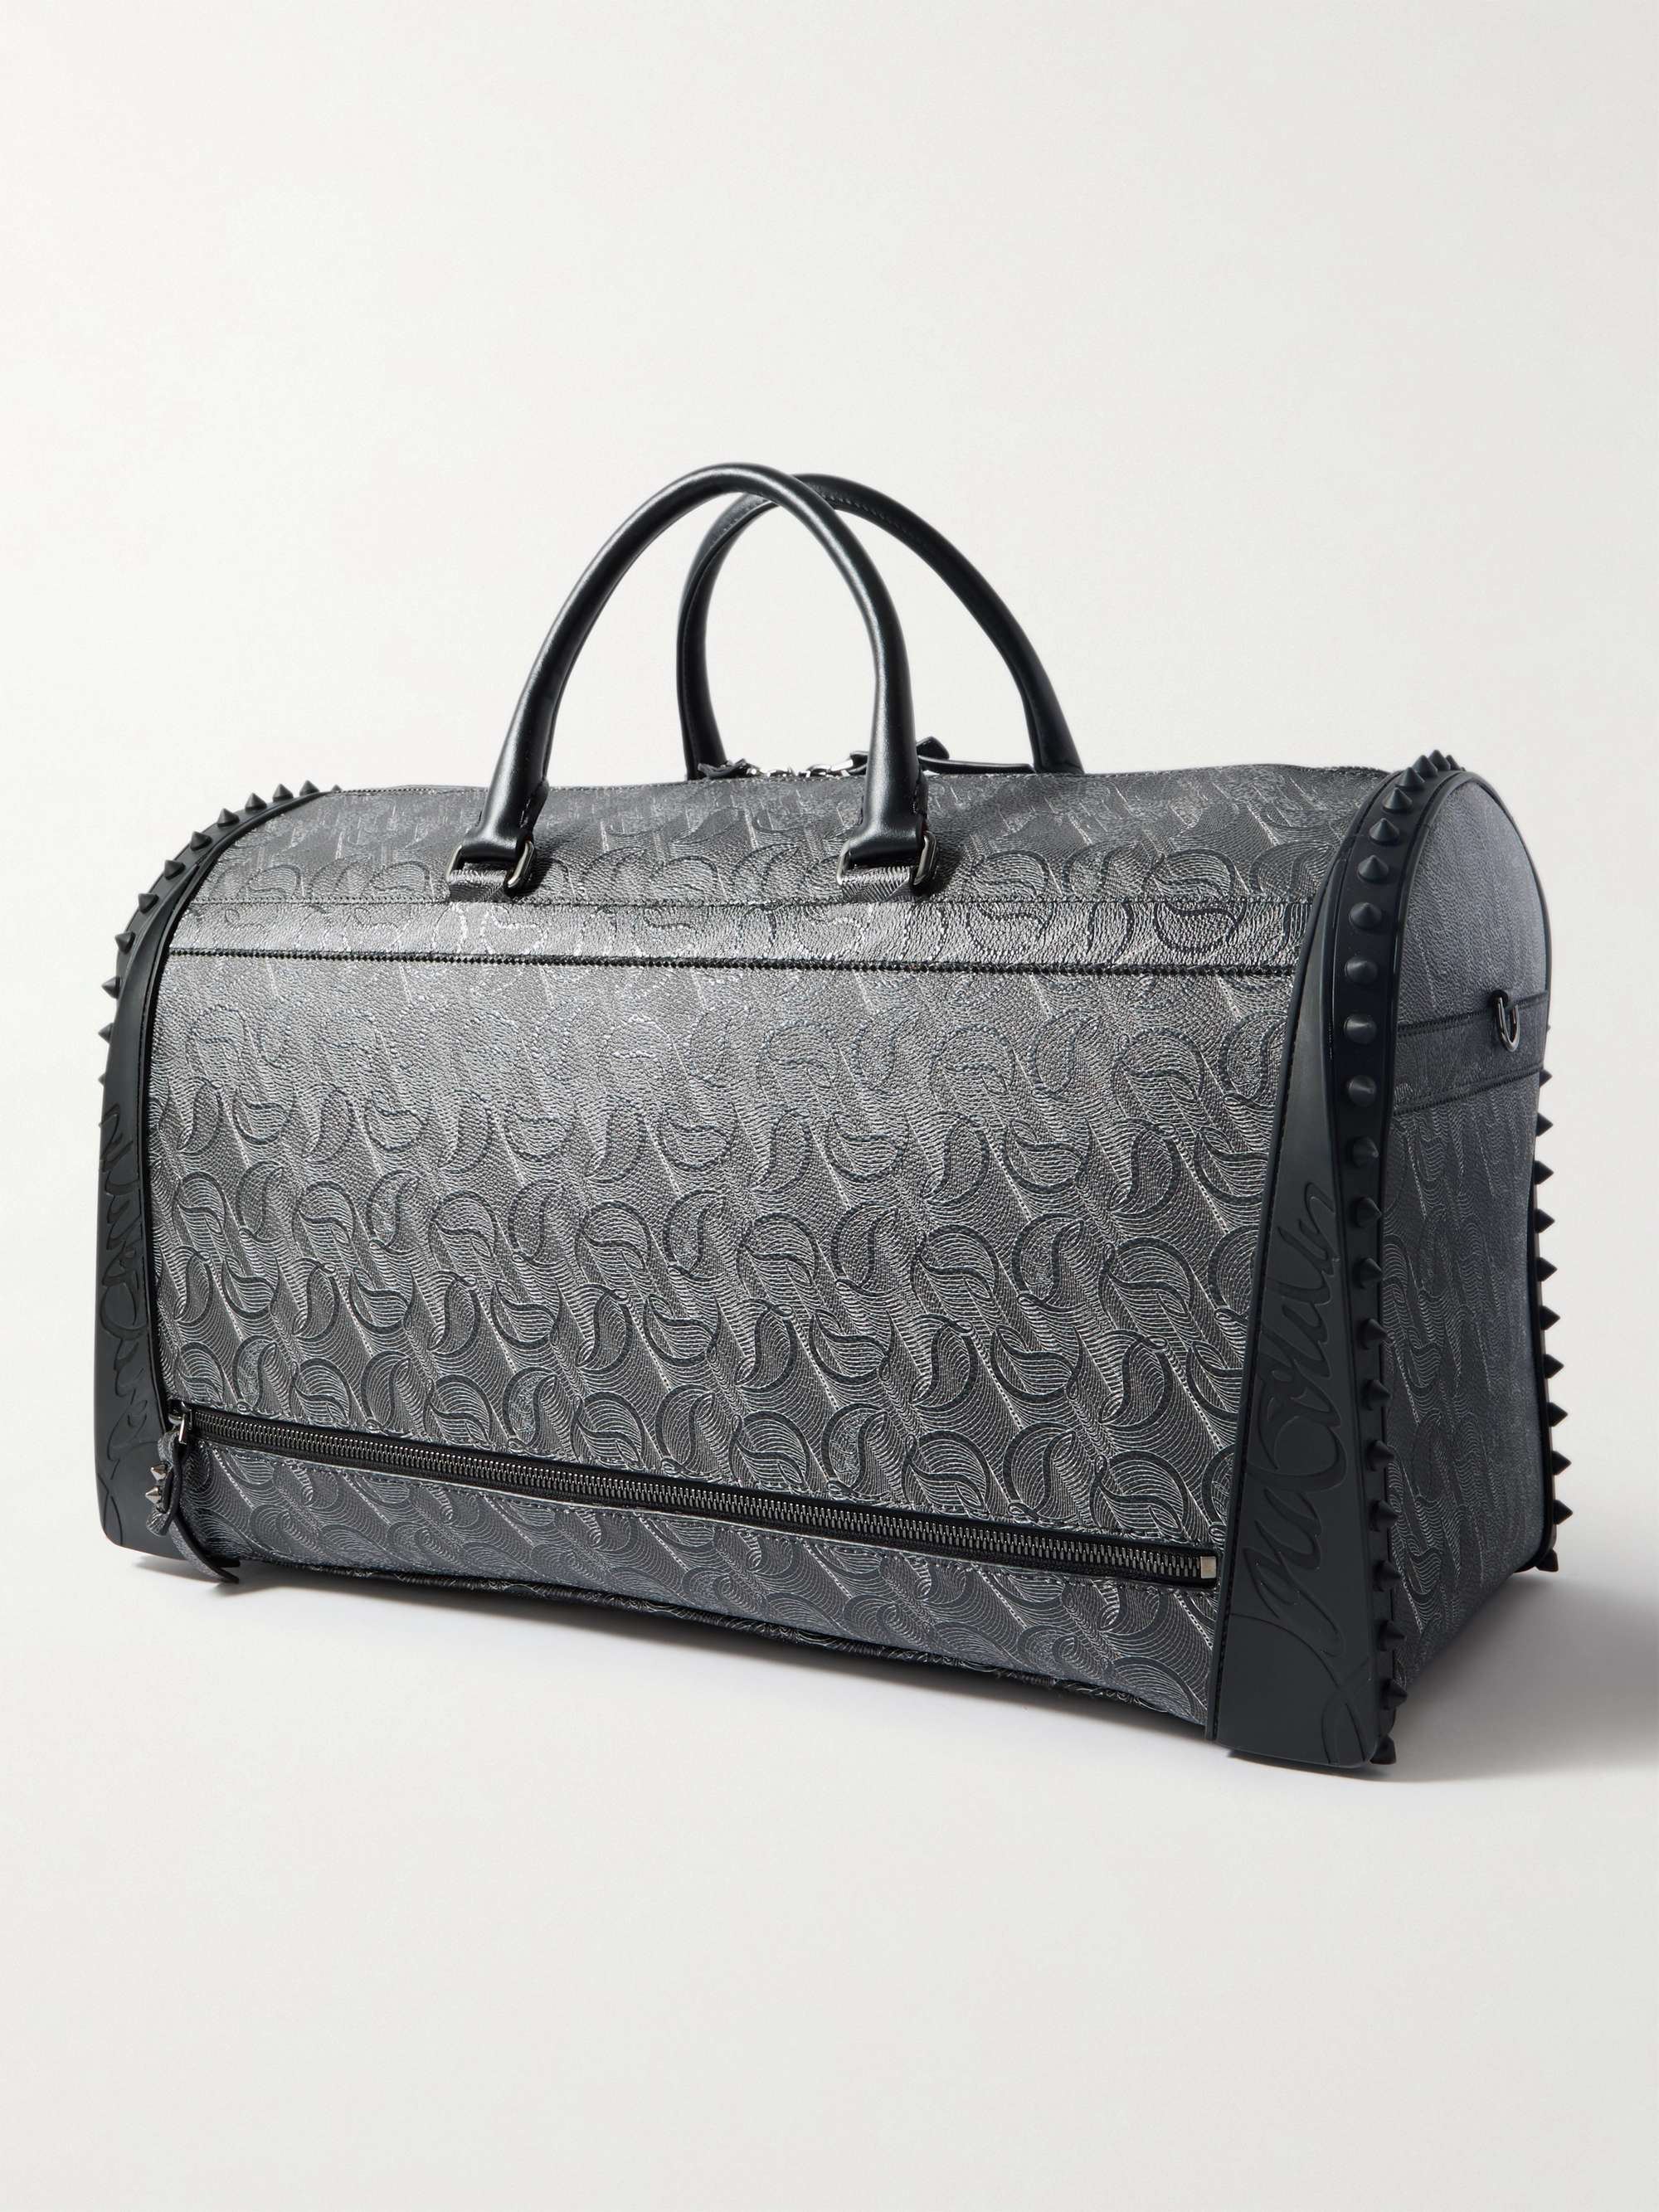 CHRISTIAN LOUBOUTIN Sneakender Studded Rubber-Trimmed Textured-Leather Weekend Bag